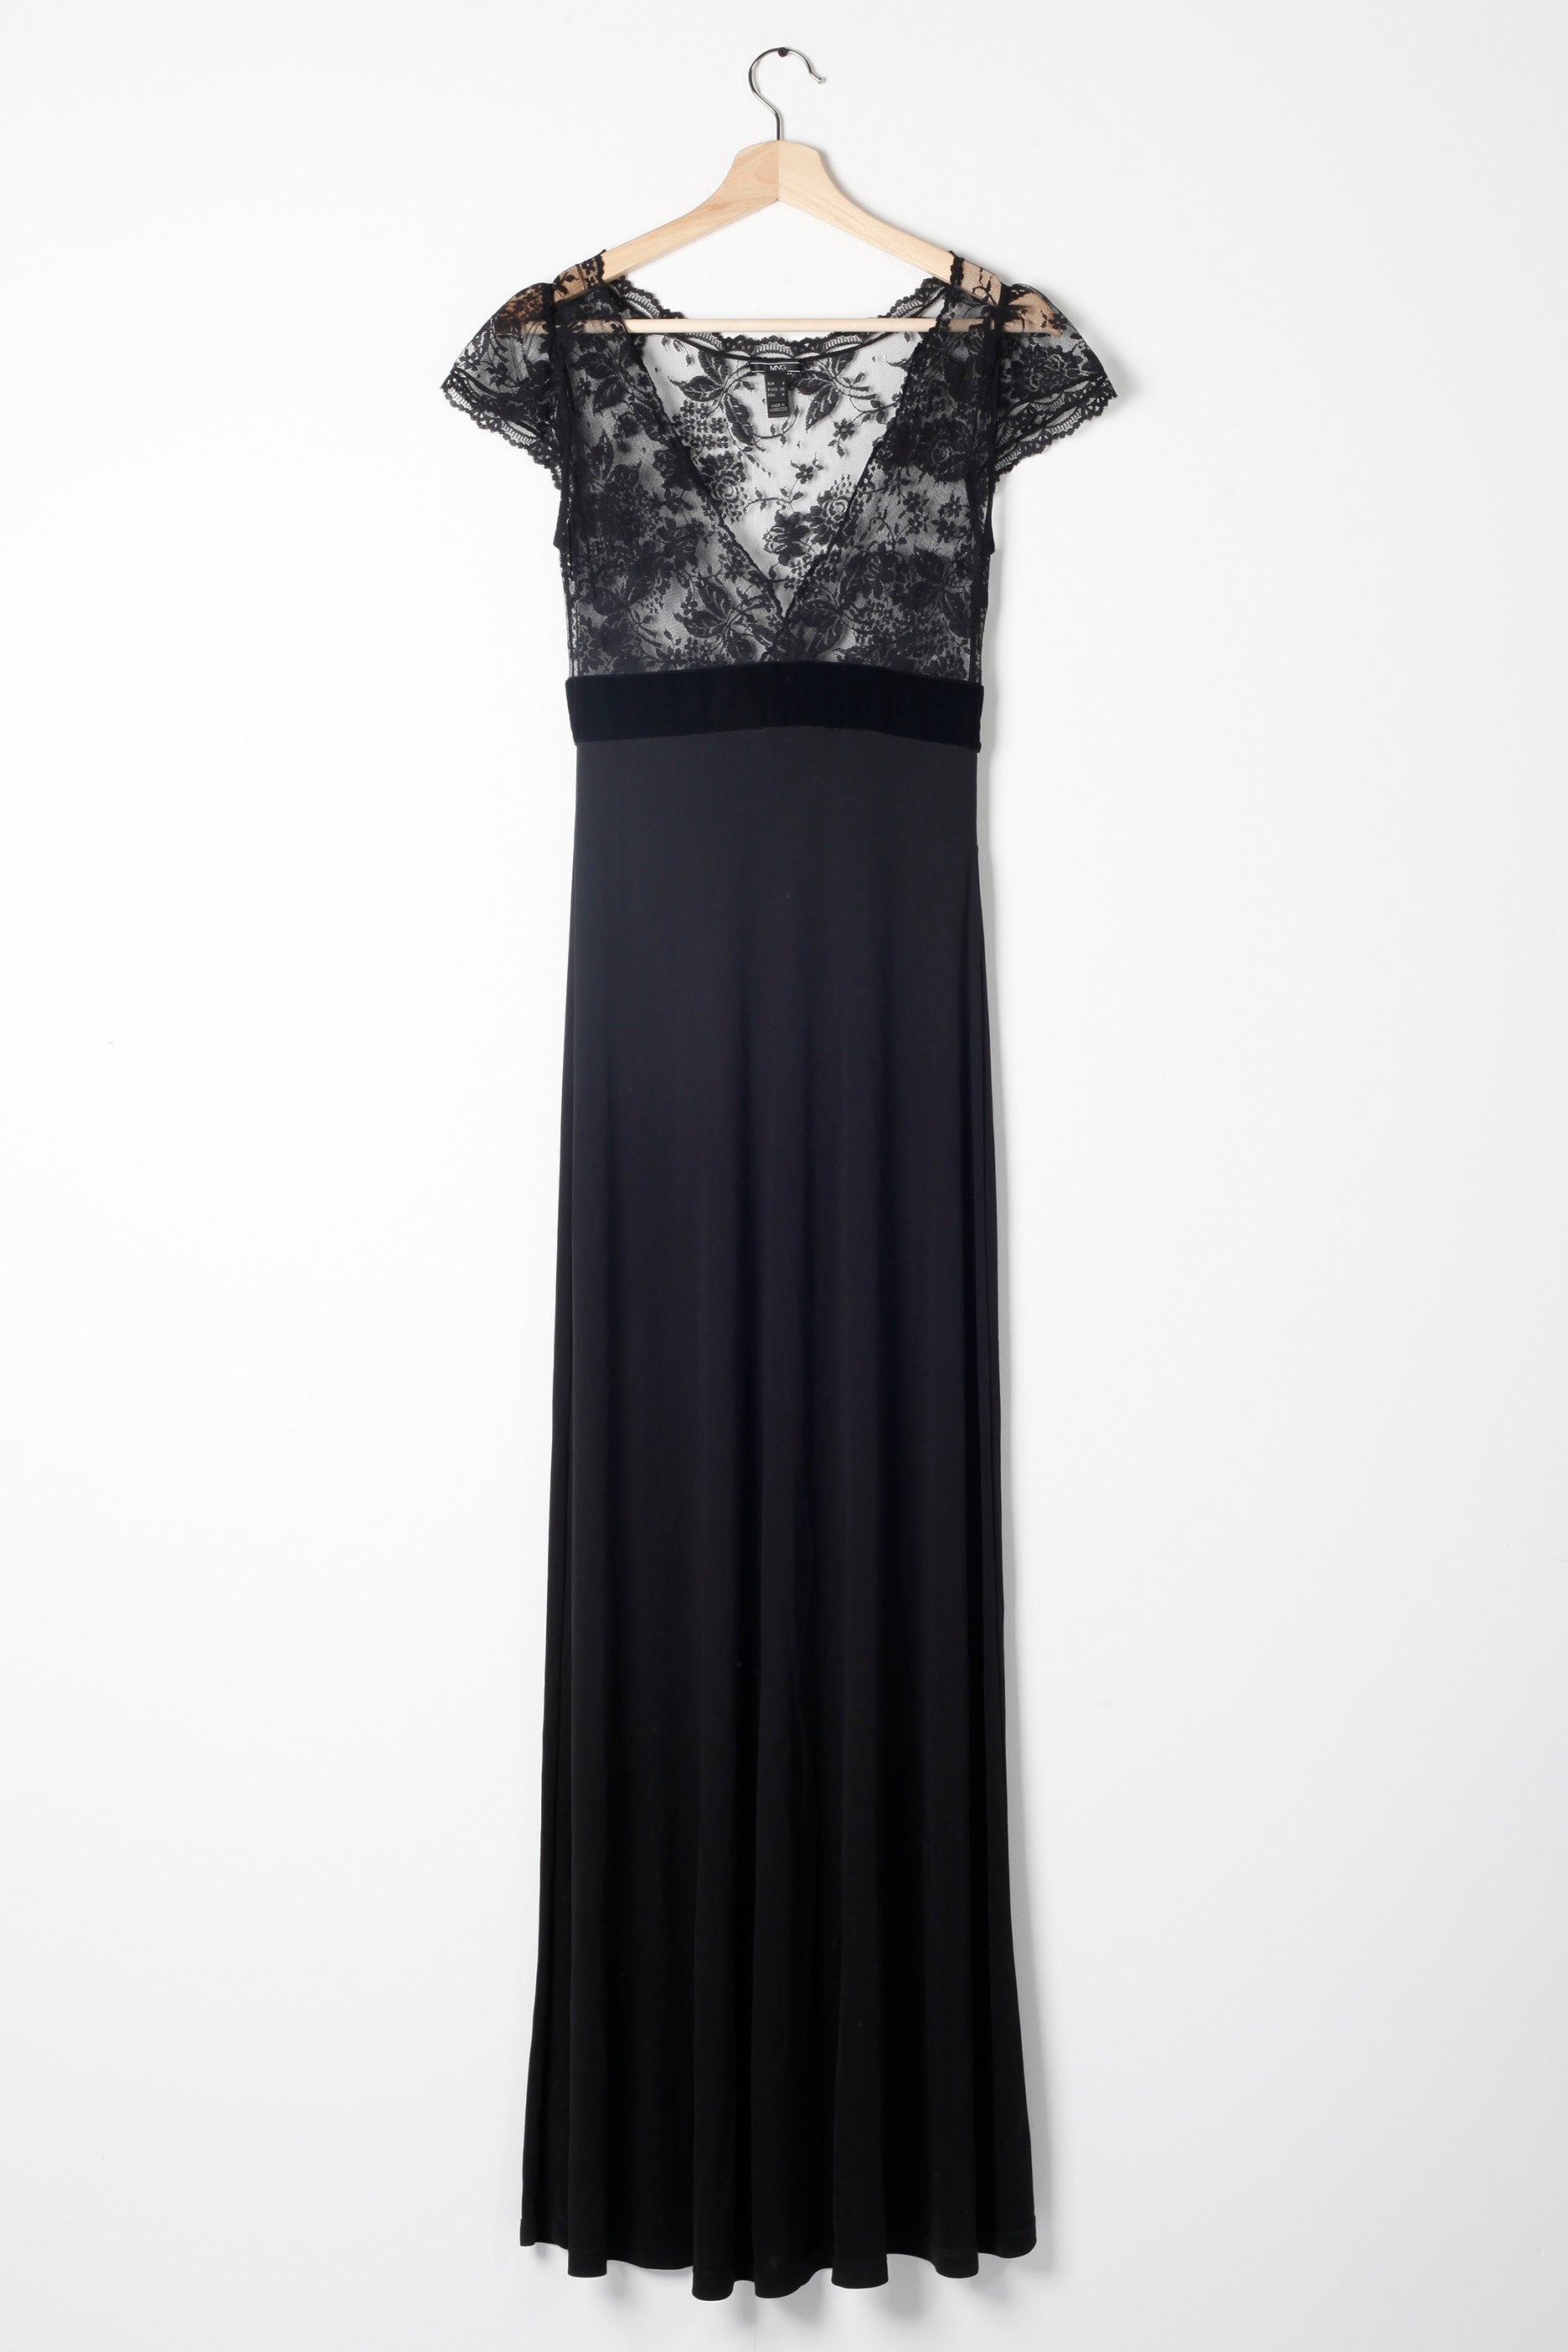 Long Black Dress with Lace Top